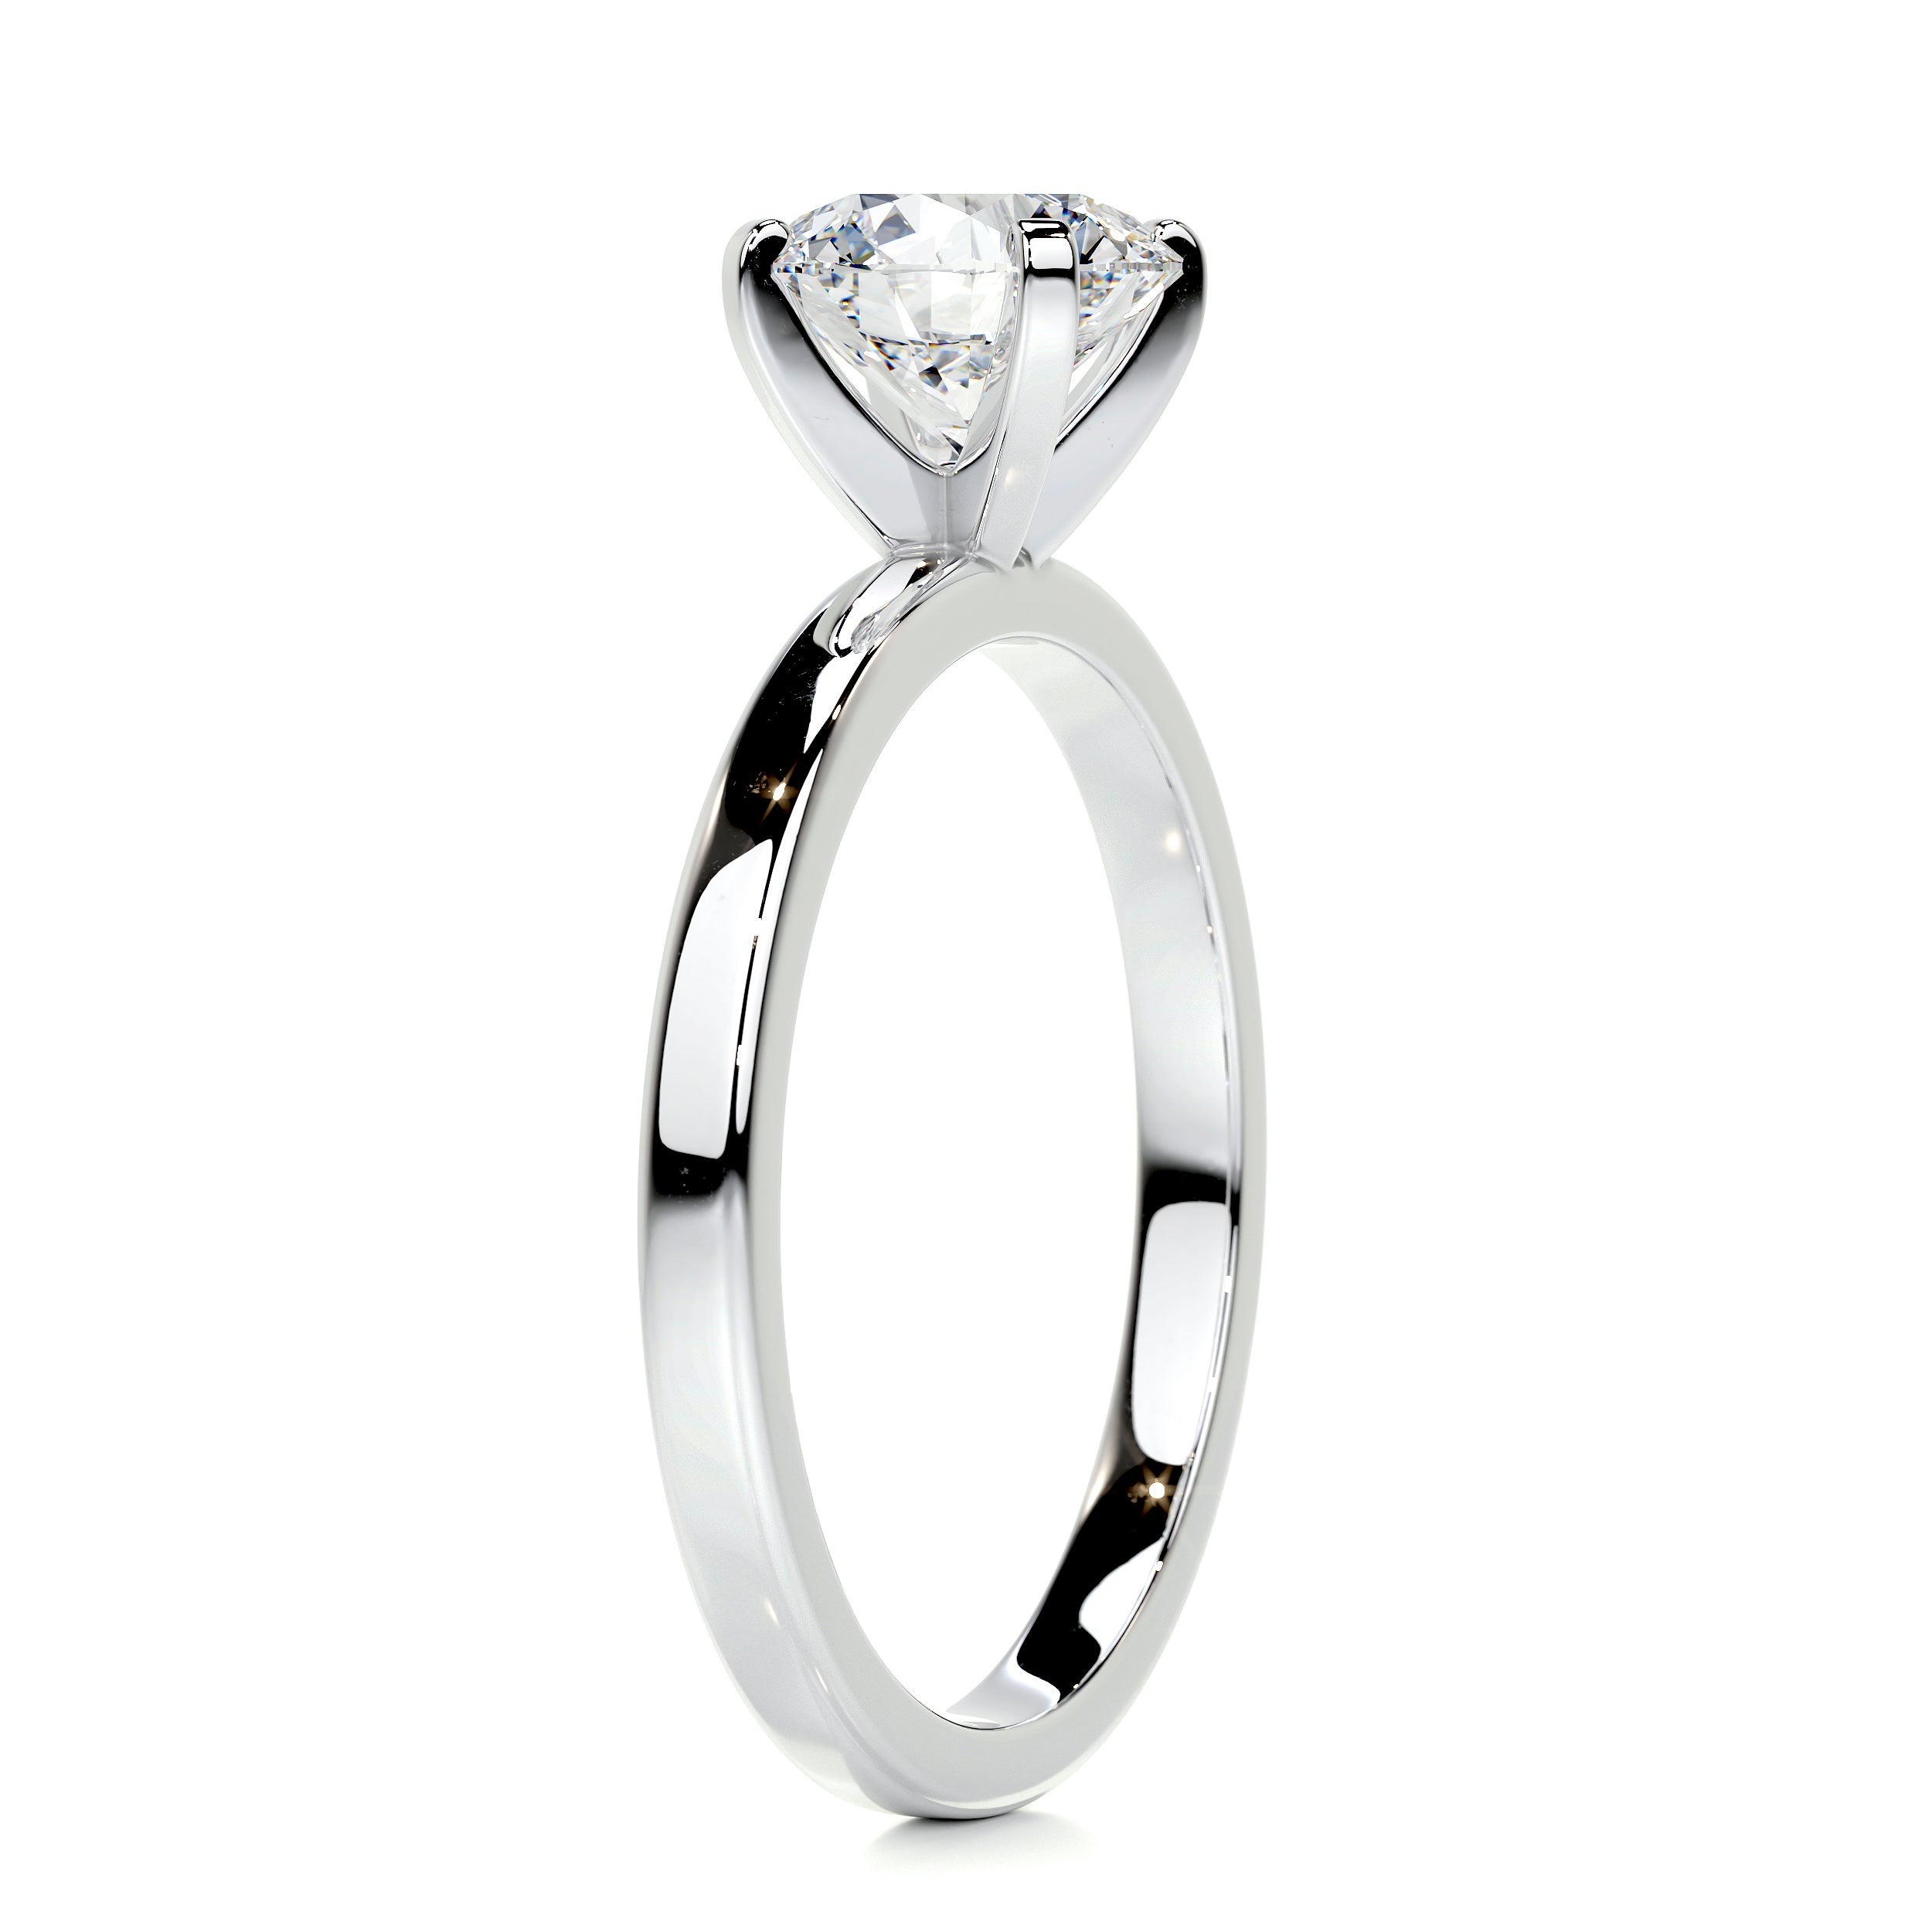 Shop Solitaire Engagement Rings - Brilliant Earth